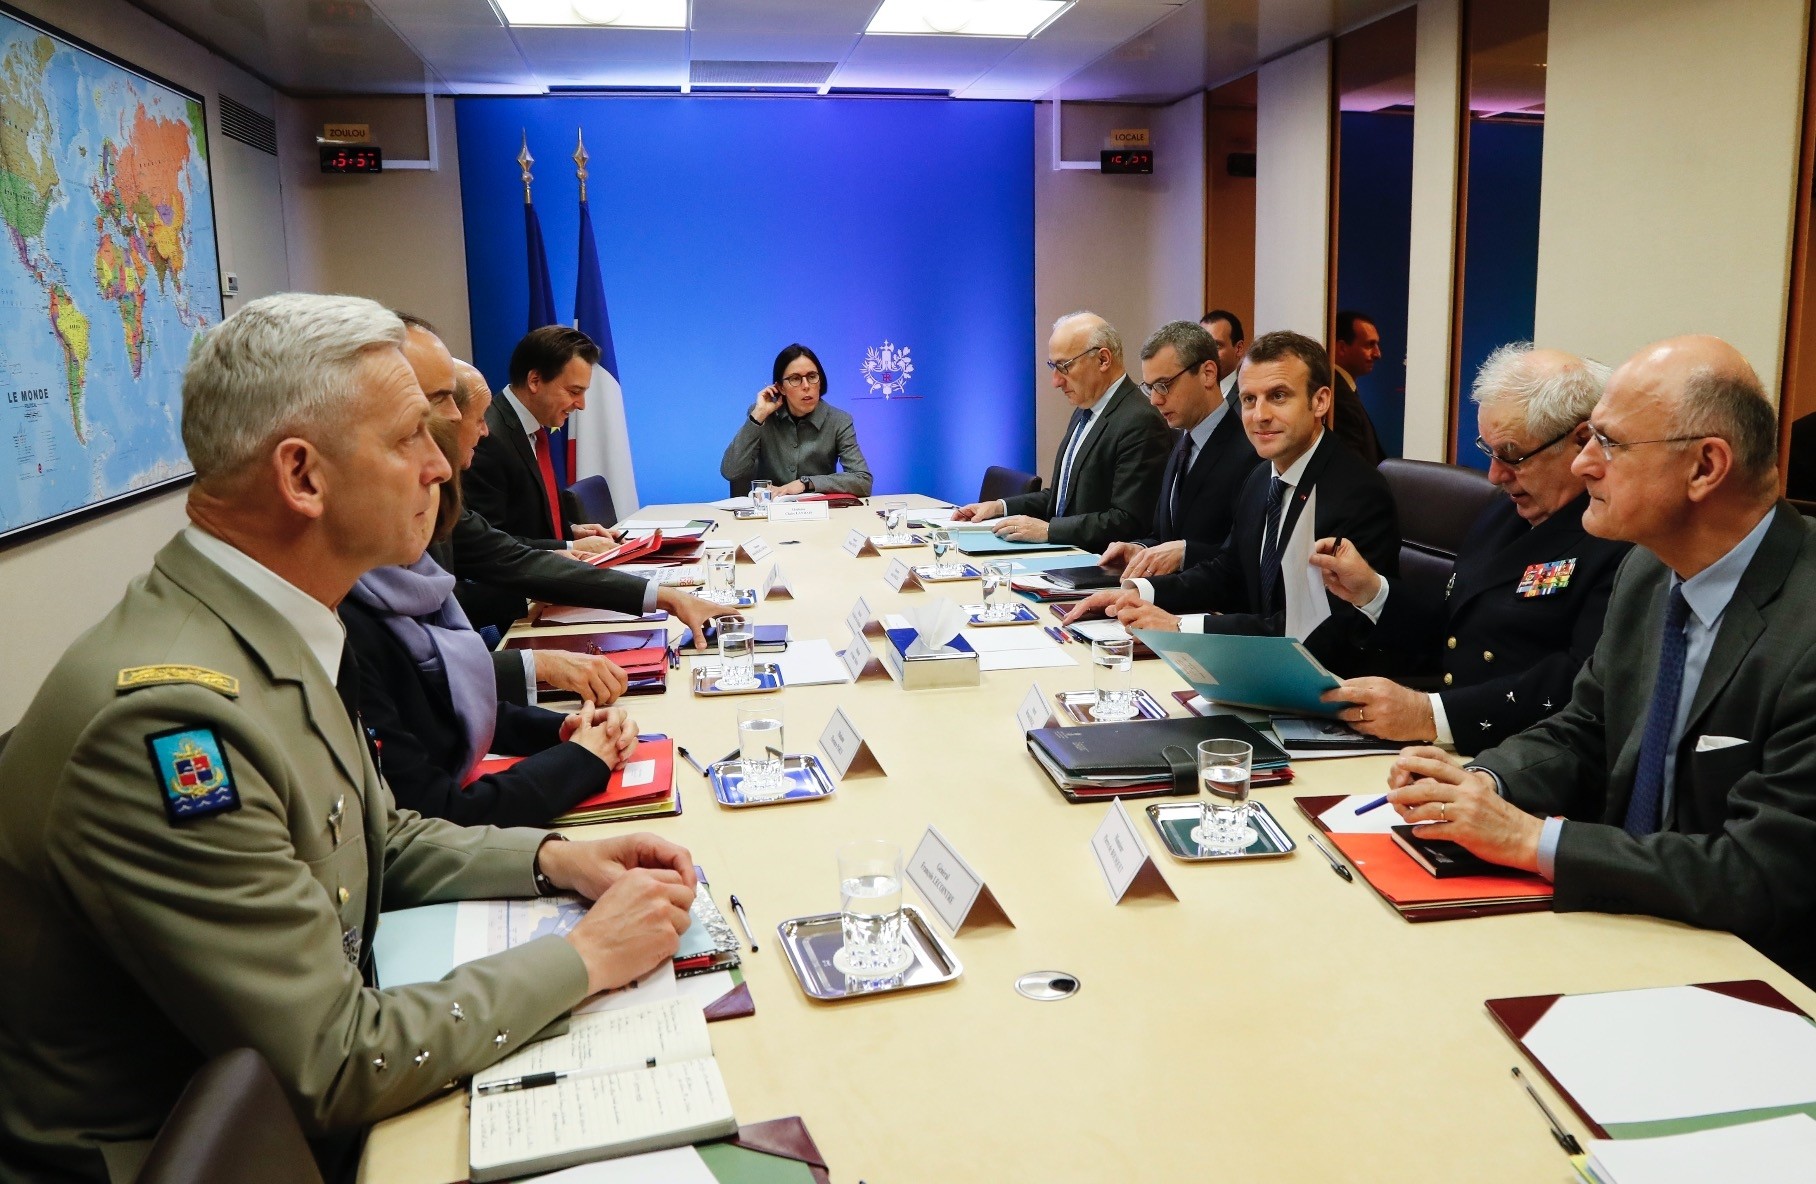 French President Emmanuel Macron attends a Defence Council at the Elysee Palace, after the U.S., U.K. and France carried out strikes against Syriau2019s regime in response to a chemical weapons attack, April, 14.